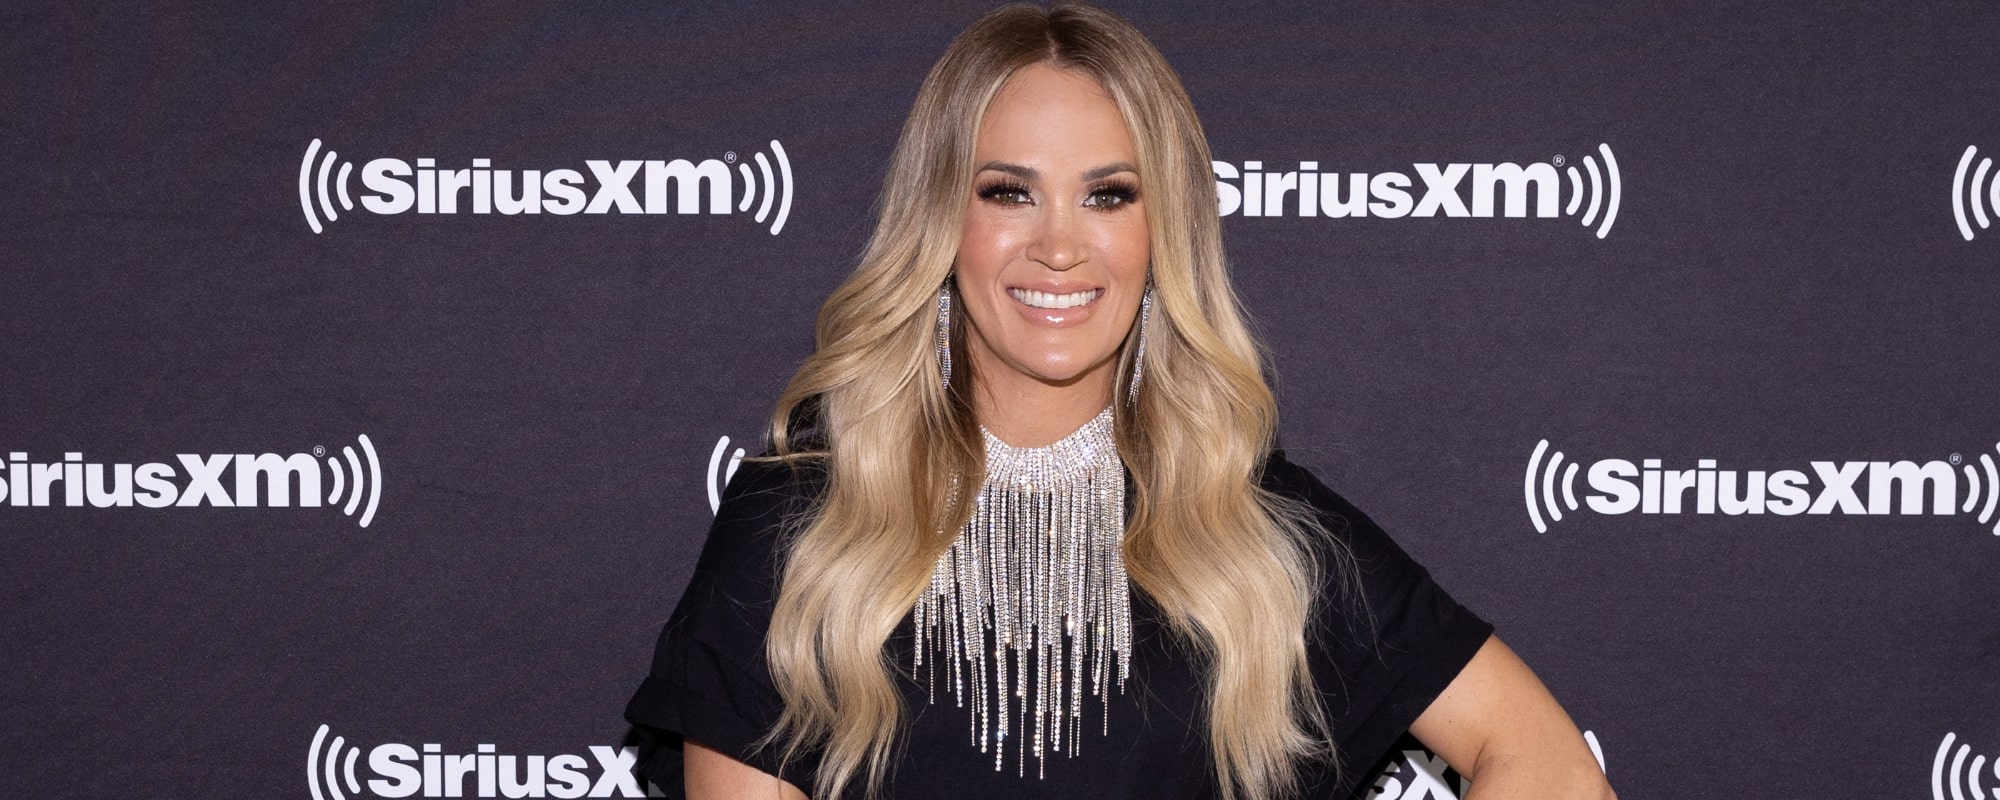 Carrie Underwood Celebrates Son Jacob’s Fifth Birthday With Family Ice Hockey Game on Frozen Pond